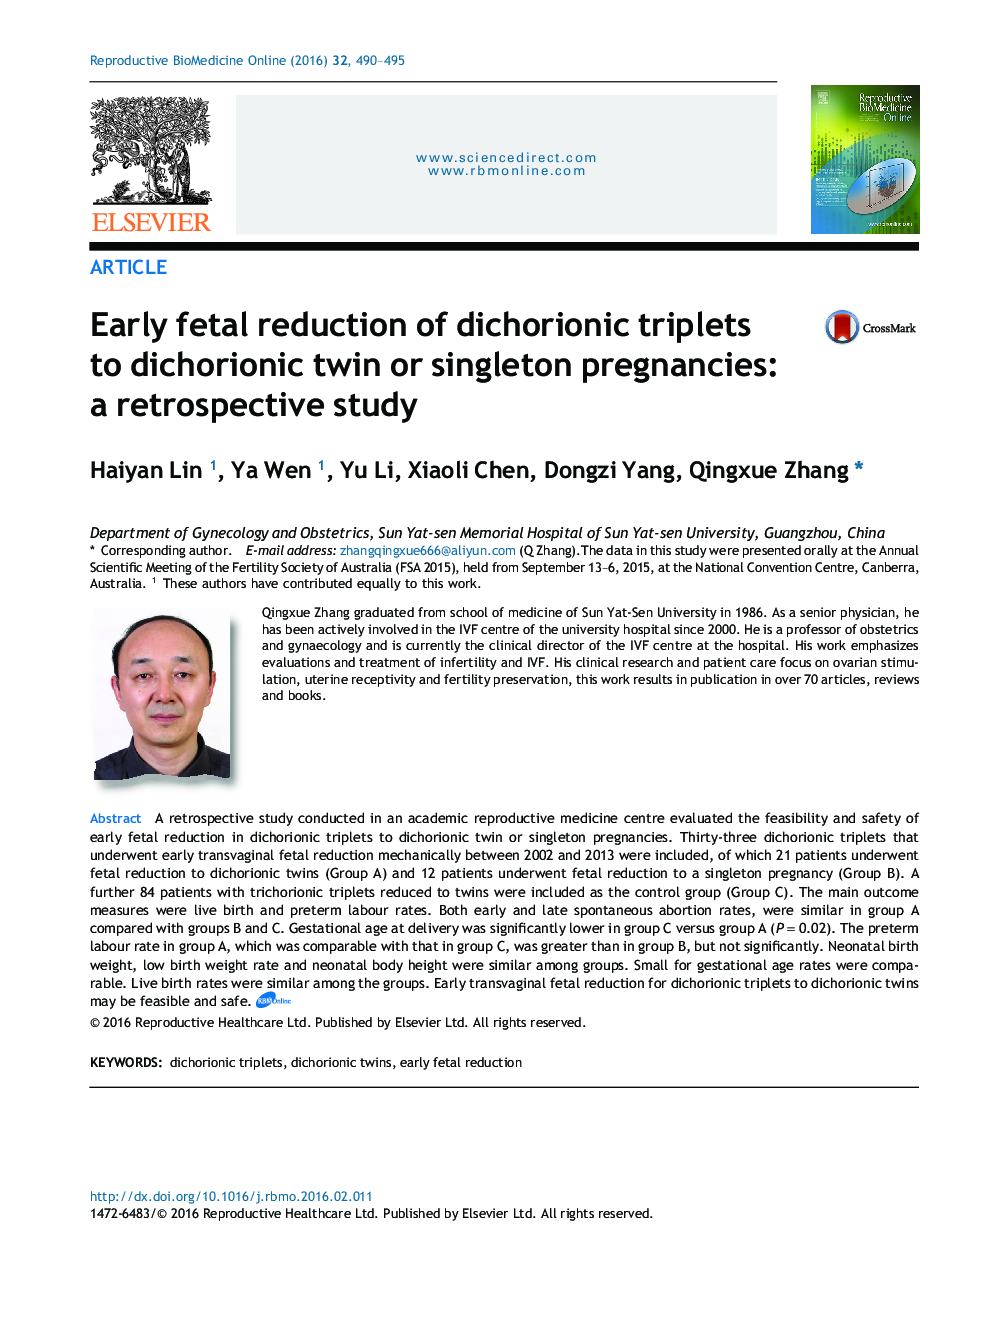 Early fetal reduction of dichorionic triplets to dichorionic twin or singleton pregnancies: a retrospective study